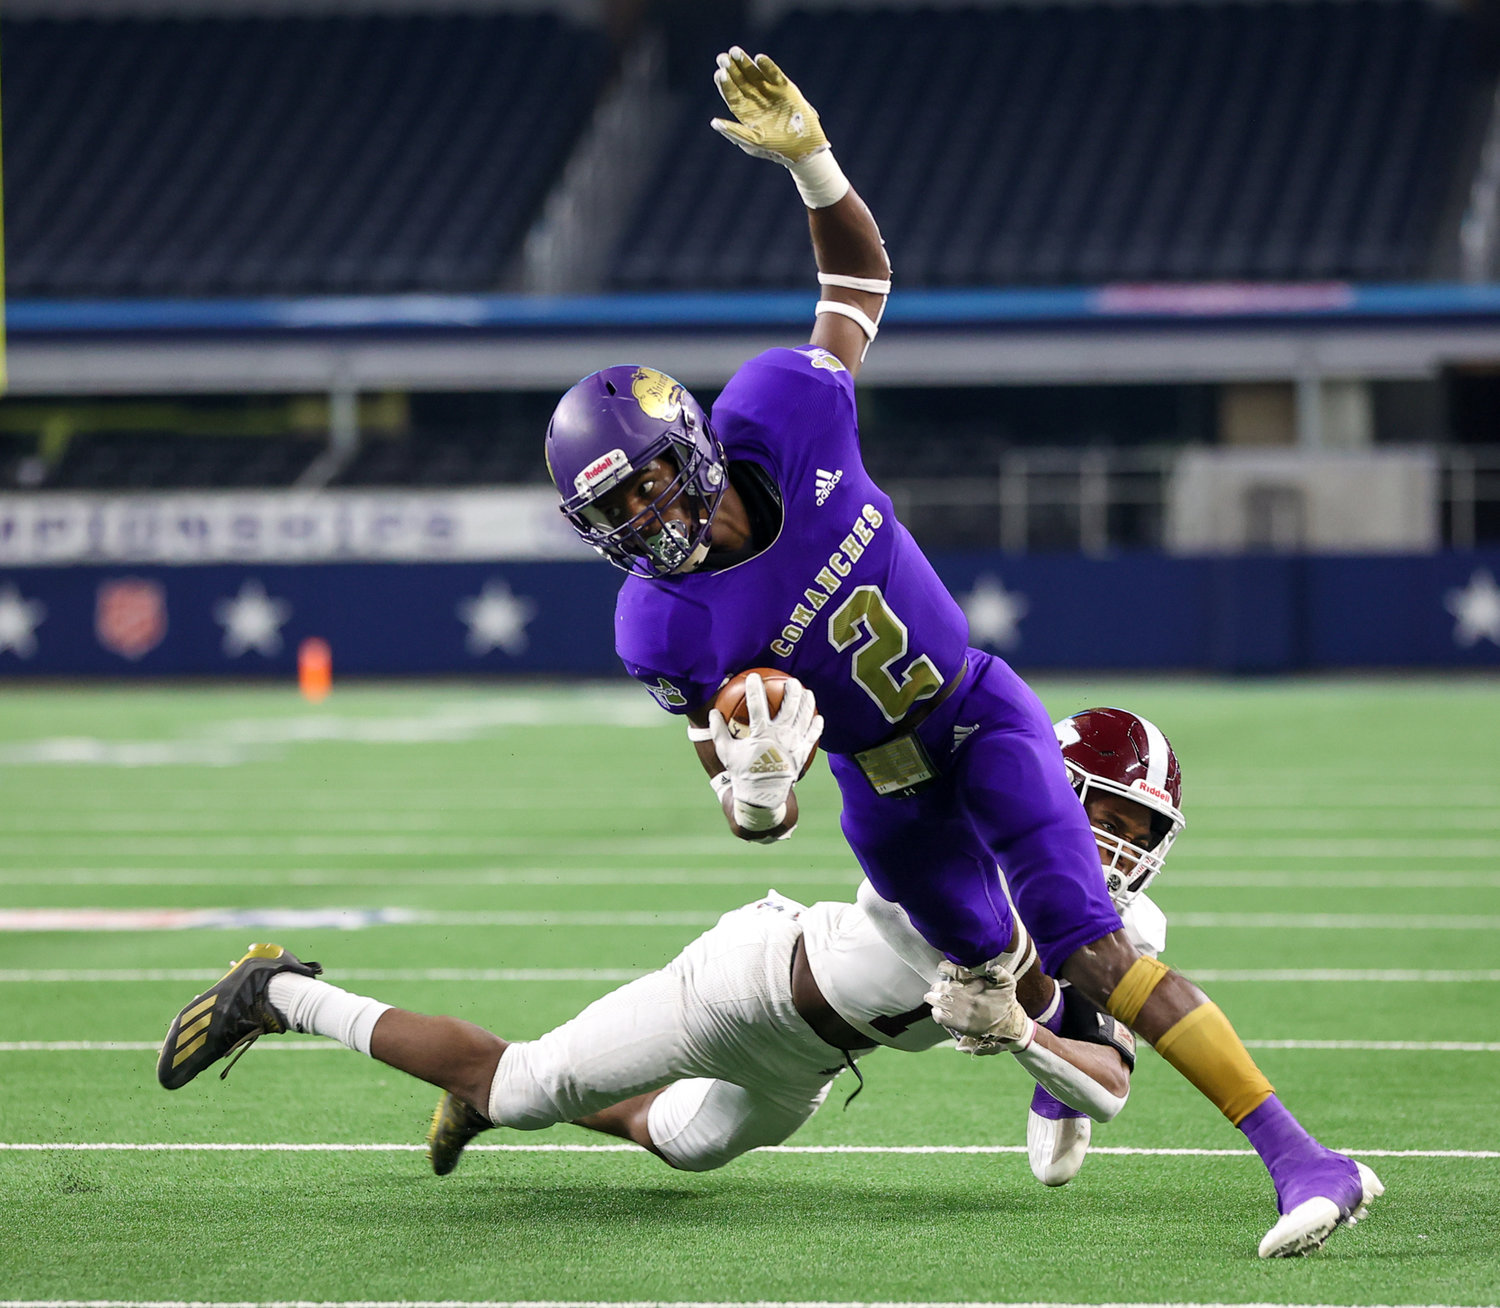 Shiner Comanches junior Dalton Brooks (2) carries the ball during the Class 2A Division I state football championship game between Shiner and Hawley on December 15, 2021 in Arlington, Texas.